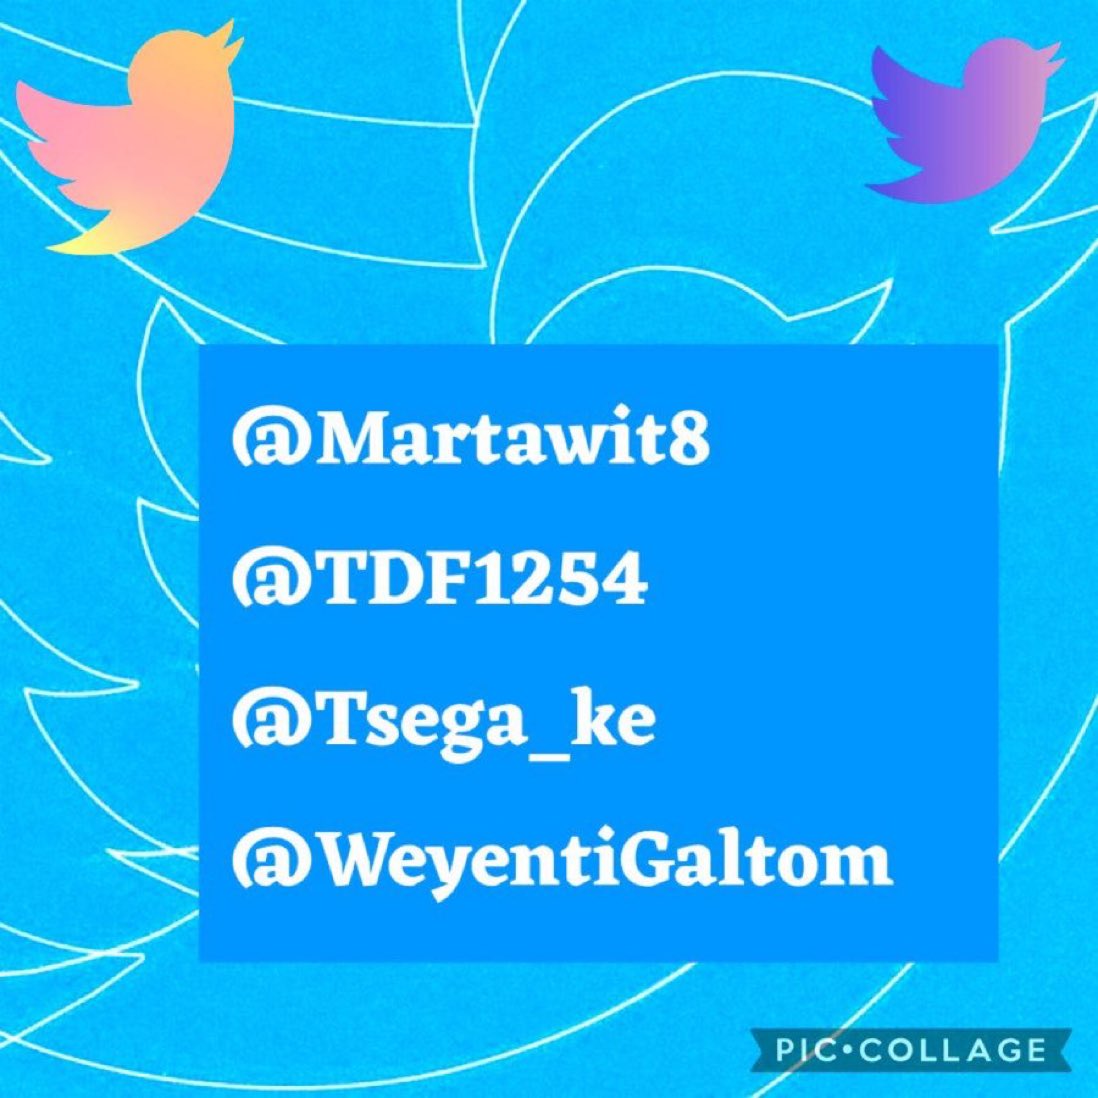 Dear ⤵️
@X @XCreators 
@elonmusk
@ElonMuskAOC
@XSpaces
@TwitterDesign 
We are kindly asking you to #Unsusspend the attached Justice Seekers accounts. @Martawit8
@TDF1254 
@Tsega_ke  
@WeyentiGaltom 
#Justice4TigrayGenocide 
@Abadit_ha